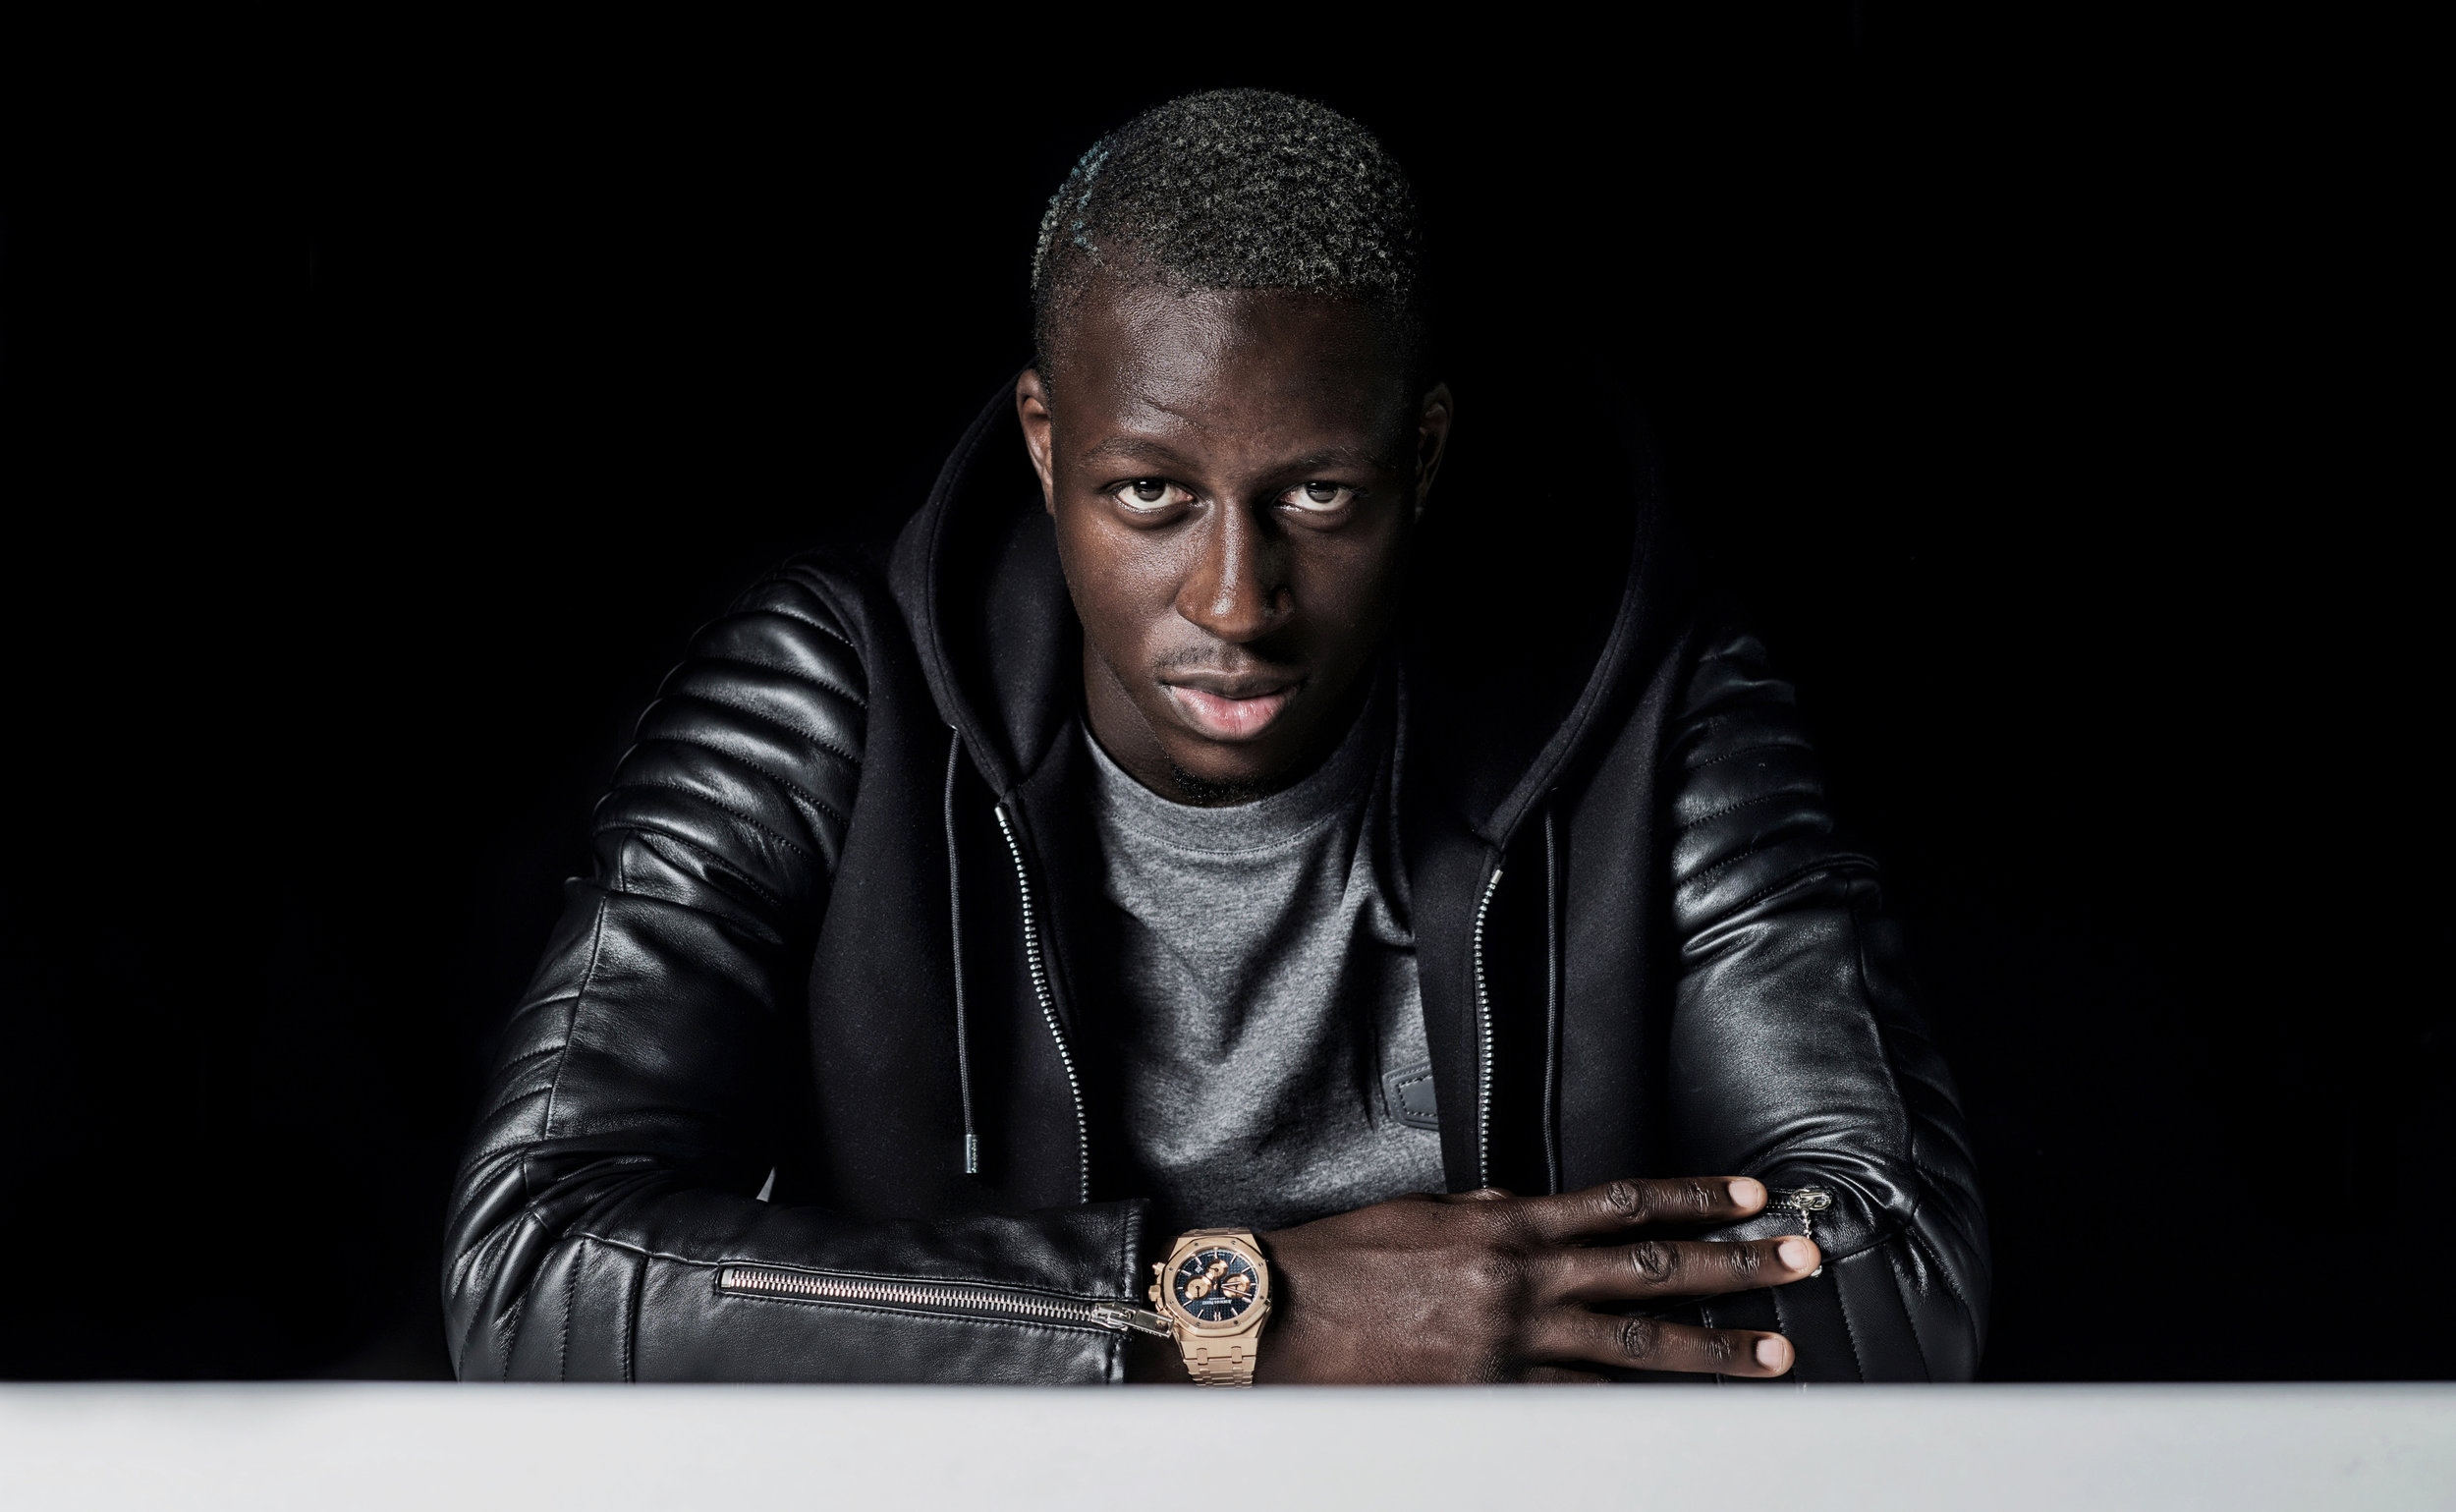  Benjamin Mendy is a French professional footballer who plays as a left back for Premier League club Manchester City and the France national team.  pictured at tarining ground Photo Paul Cooper 